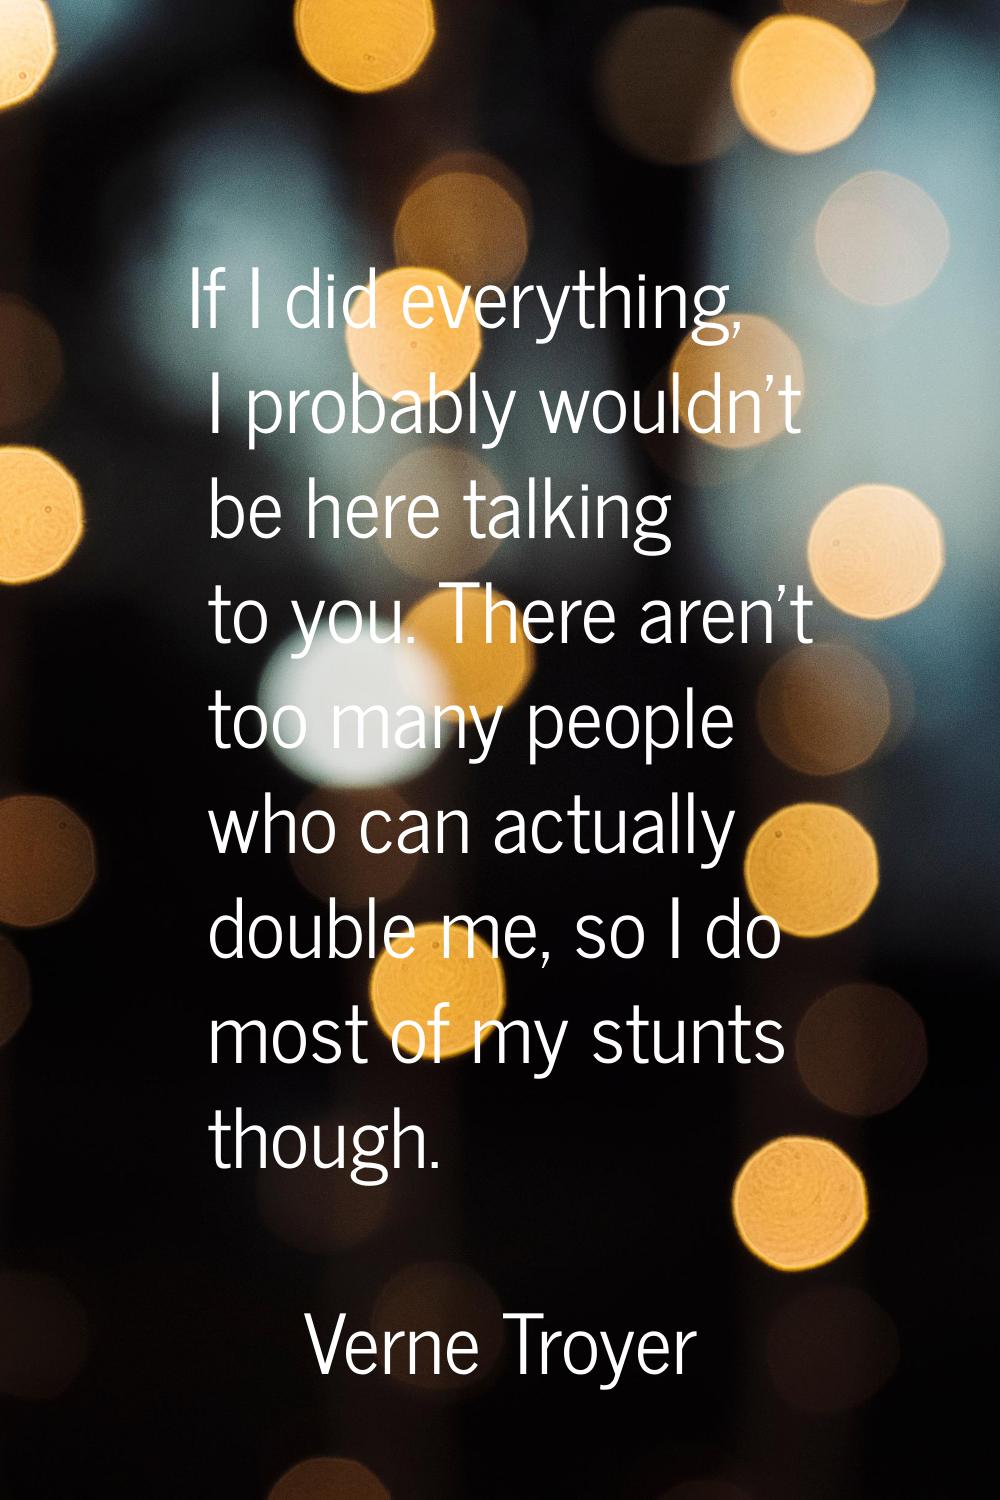 If I did everything, I probably wouldn't be here talking to you. There aren't too many people who c